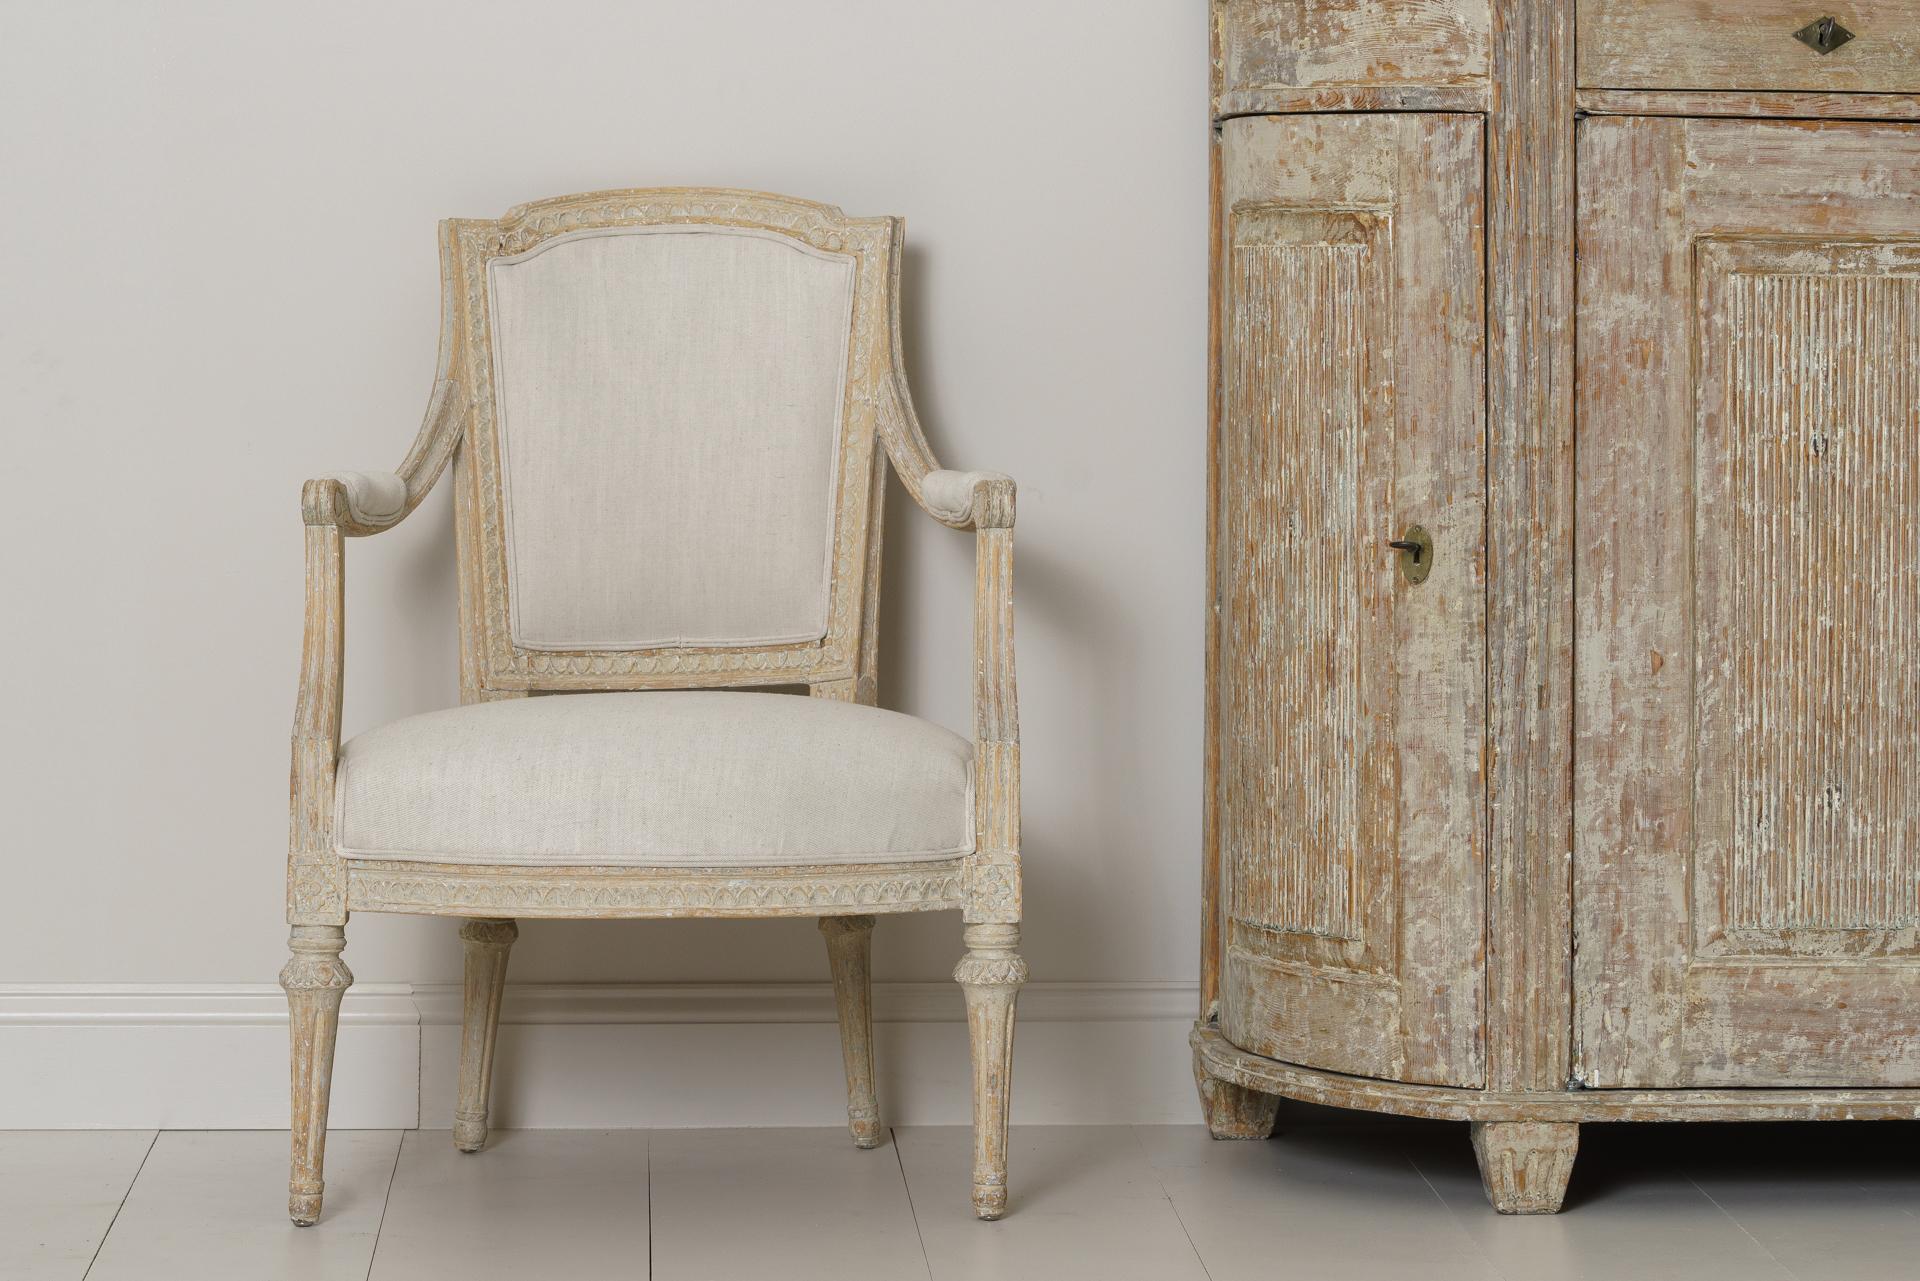 A Swedish period Gustavian armchair signed IEH by Erik Höglander (1750-1813) from Stockholm. This beautifully made chair has been hand-scraped to reveal the original paint and has been newly upholstered in linen. The seat height is 16.57 inches.